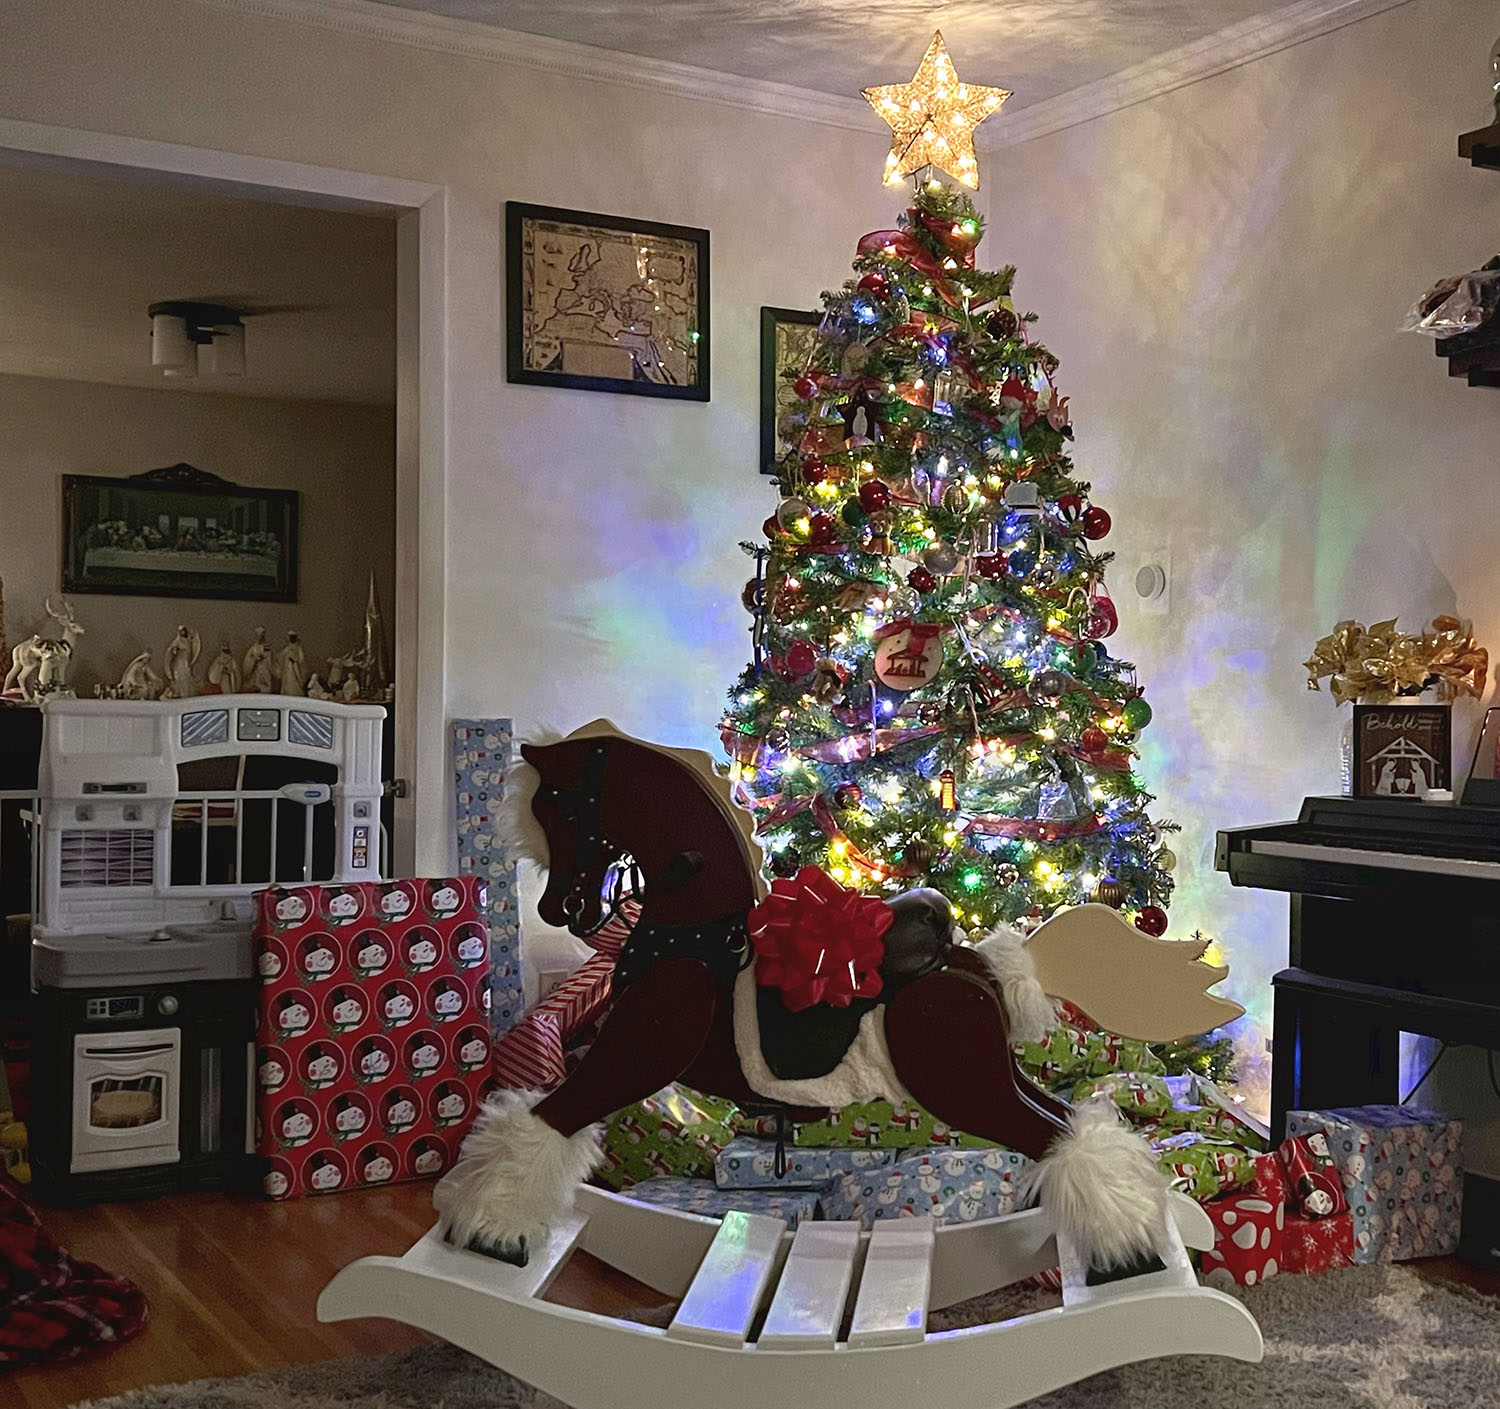 Wooden Horse under Christmas tree